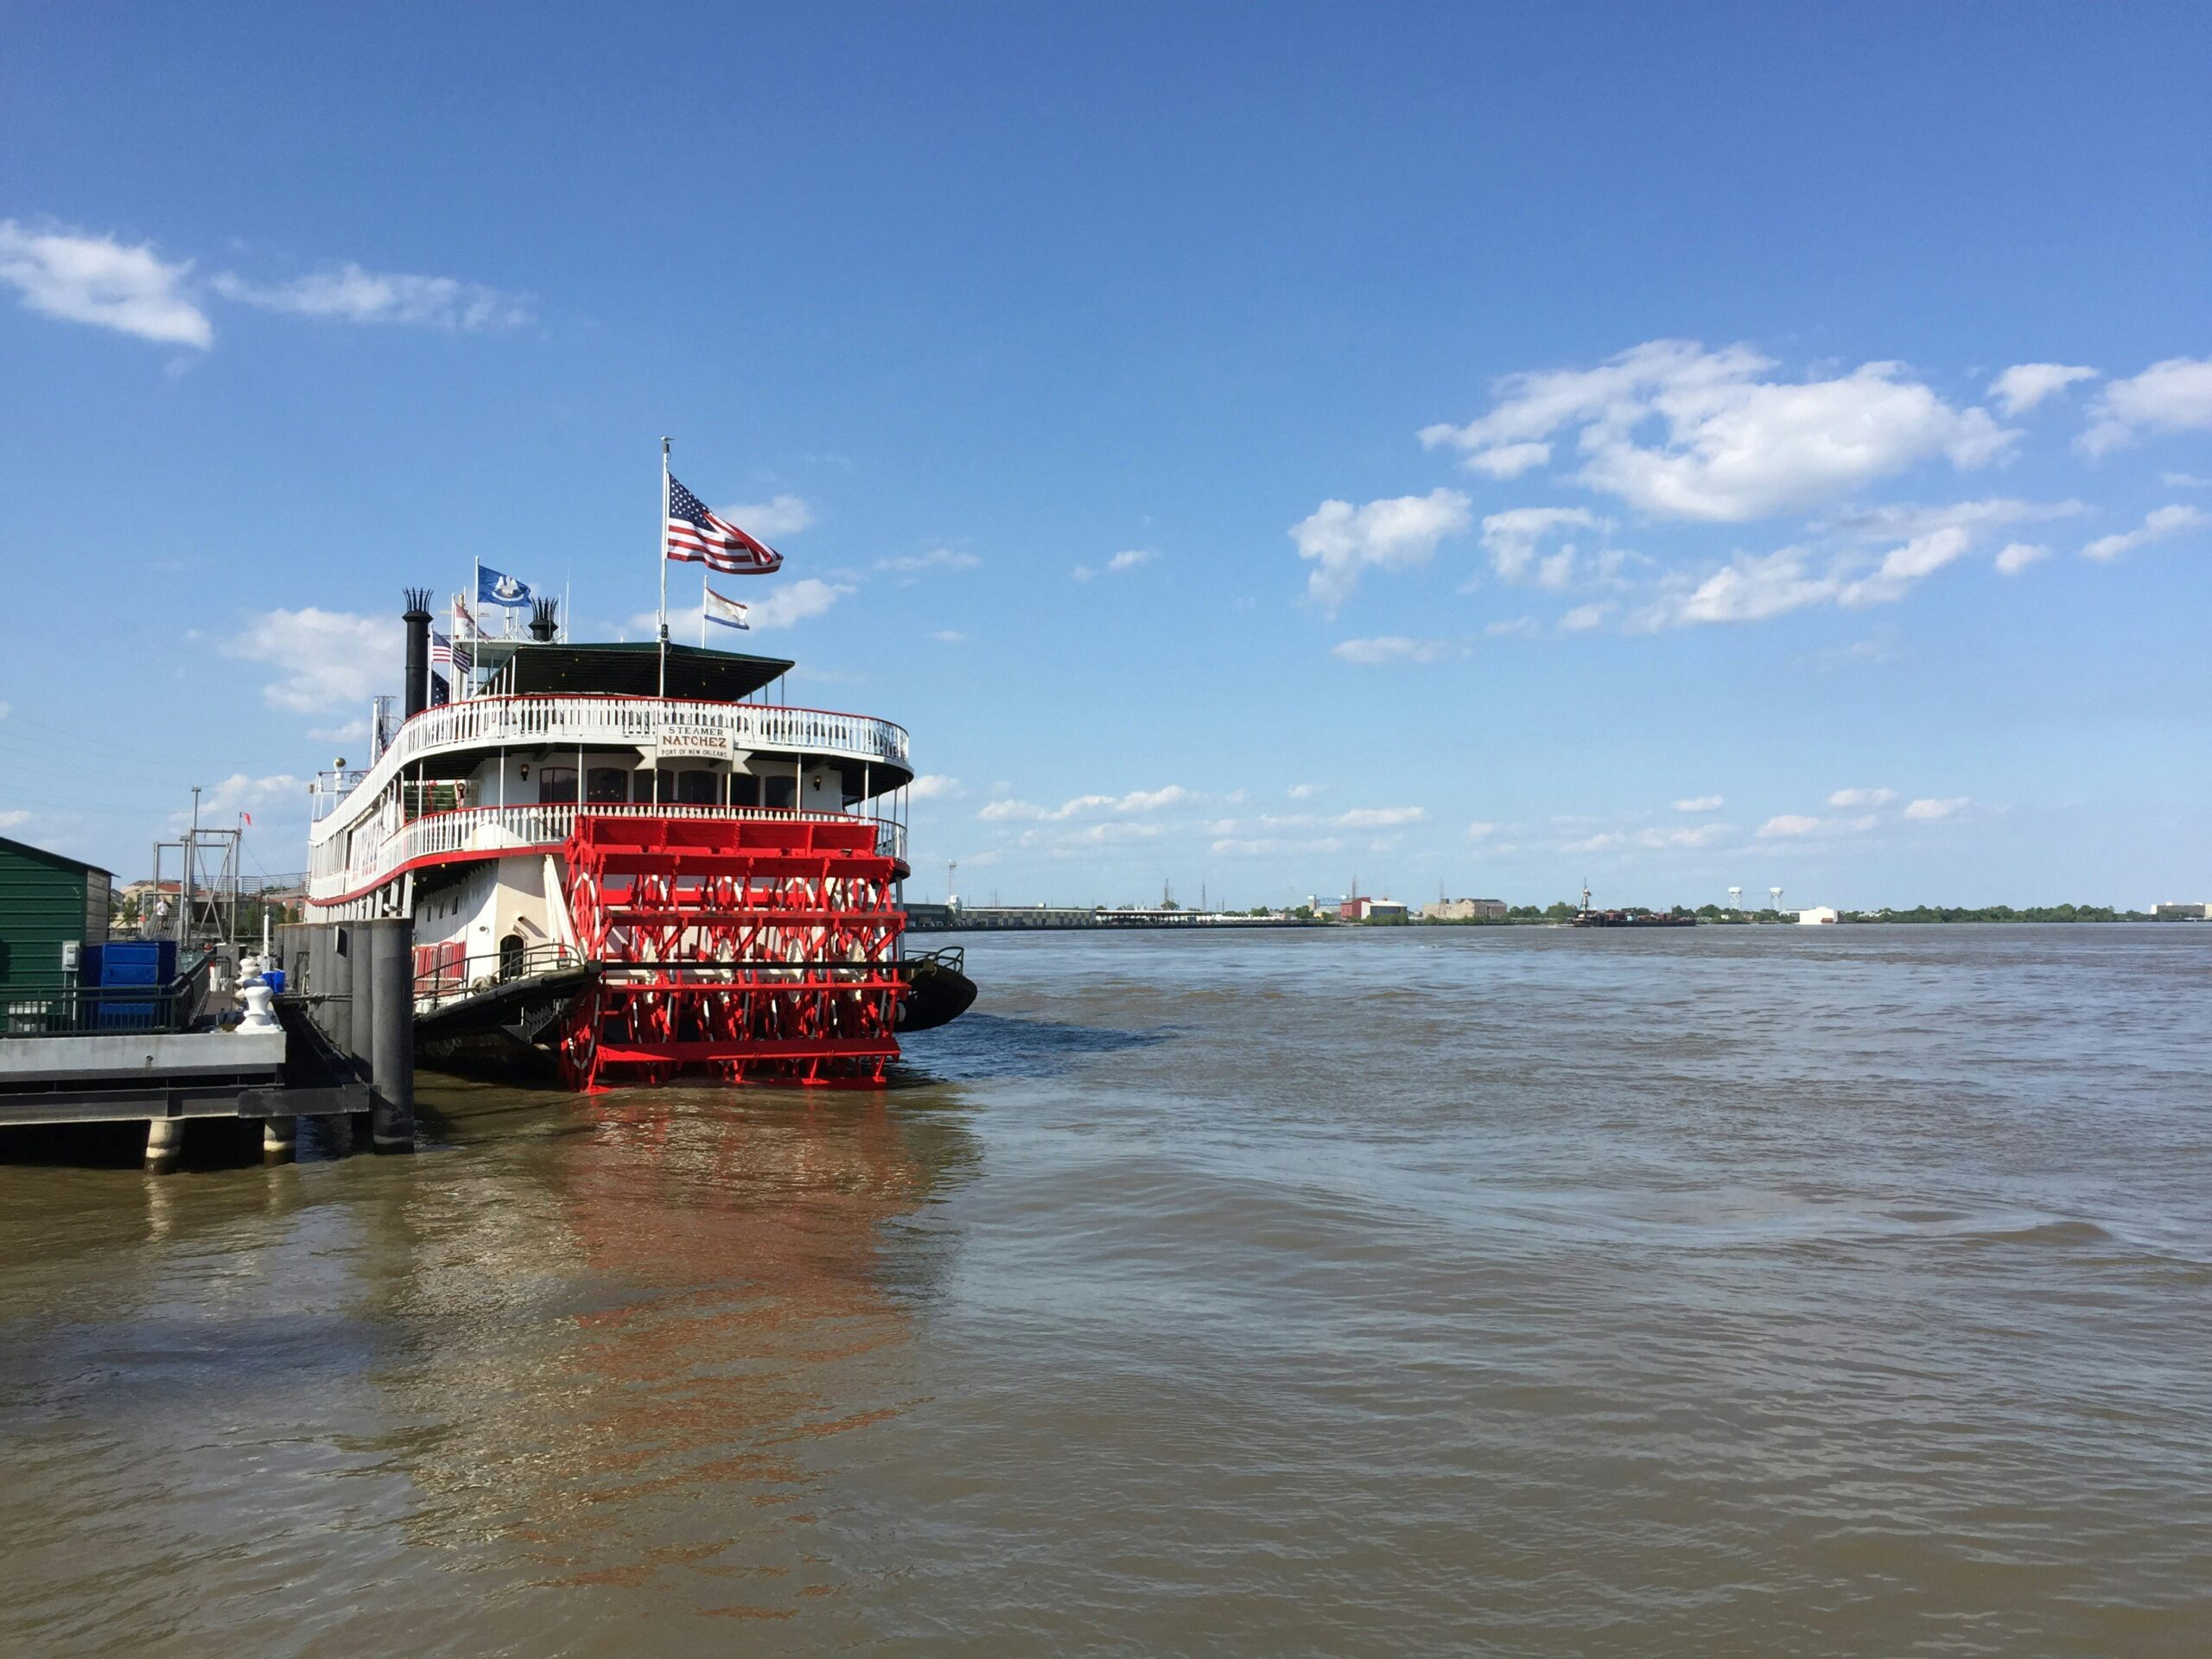 The weather that travelers can enjoy in March make it one of the best times to visit New Orleans.
pictured: a New Orleans steam boat 